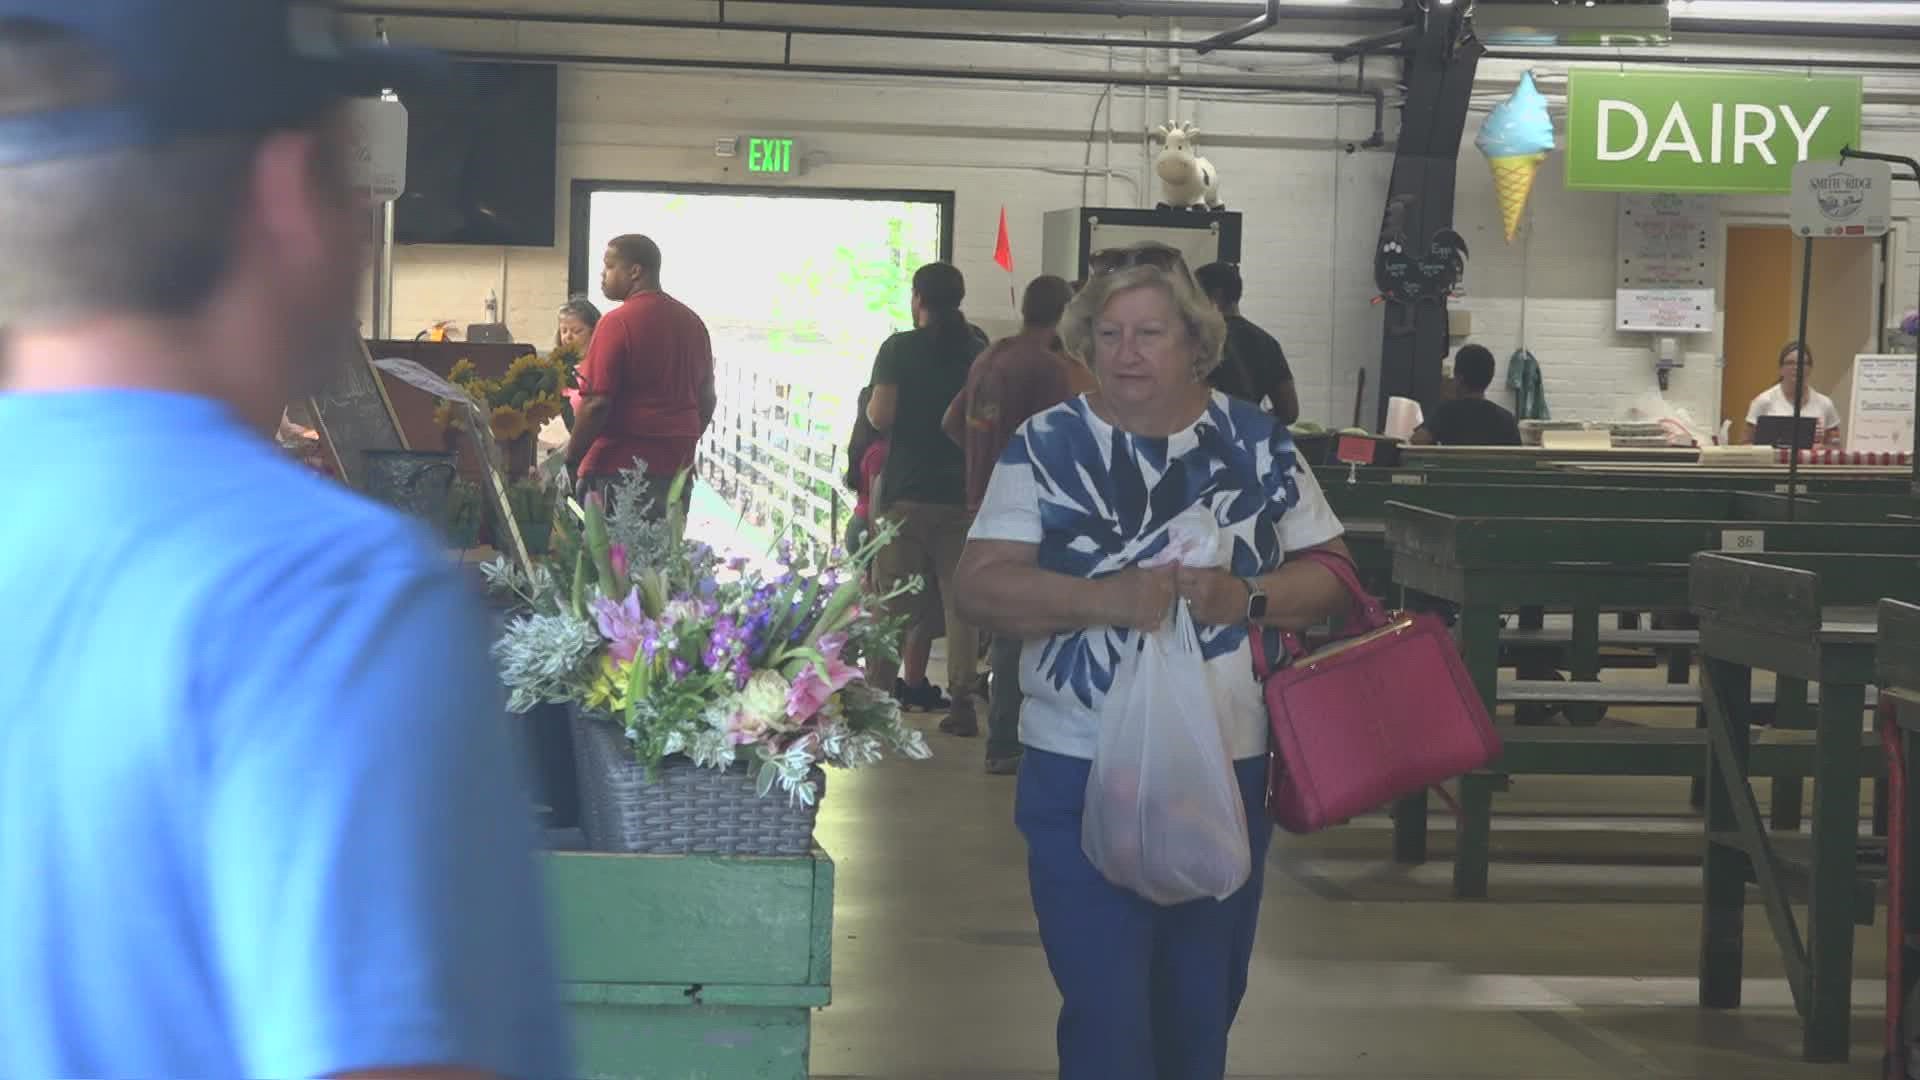 The curb market has giveaways, live music and 70 vendors from across North Carolina planned to highlight the impact of local farmers.